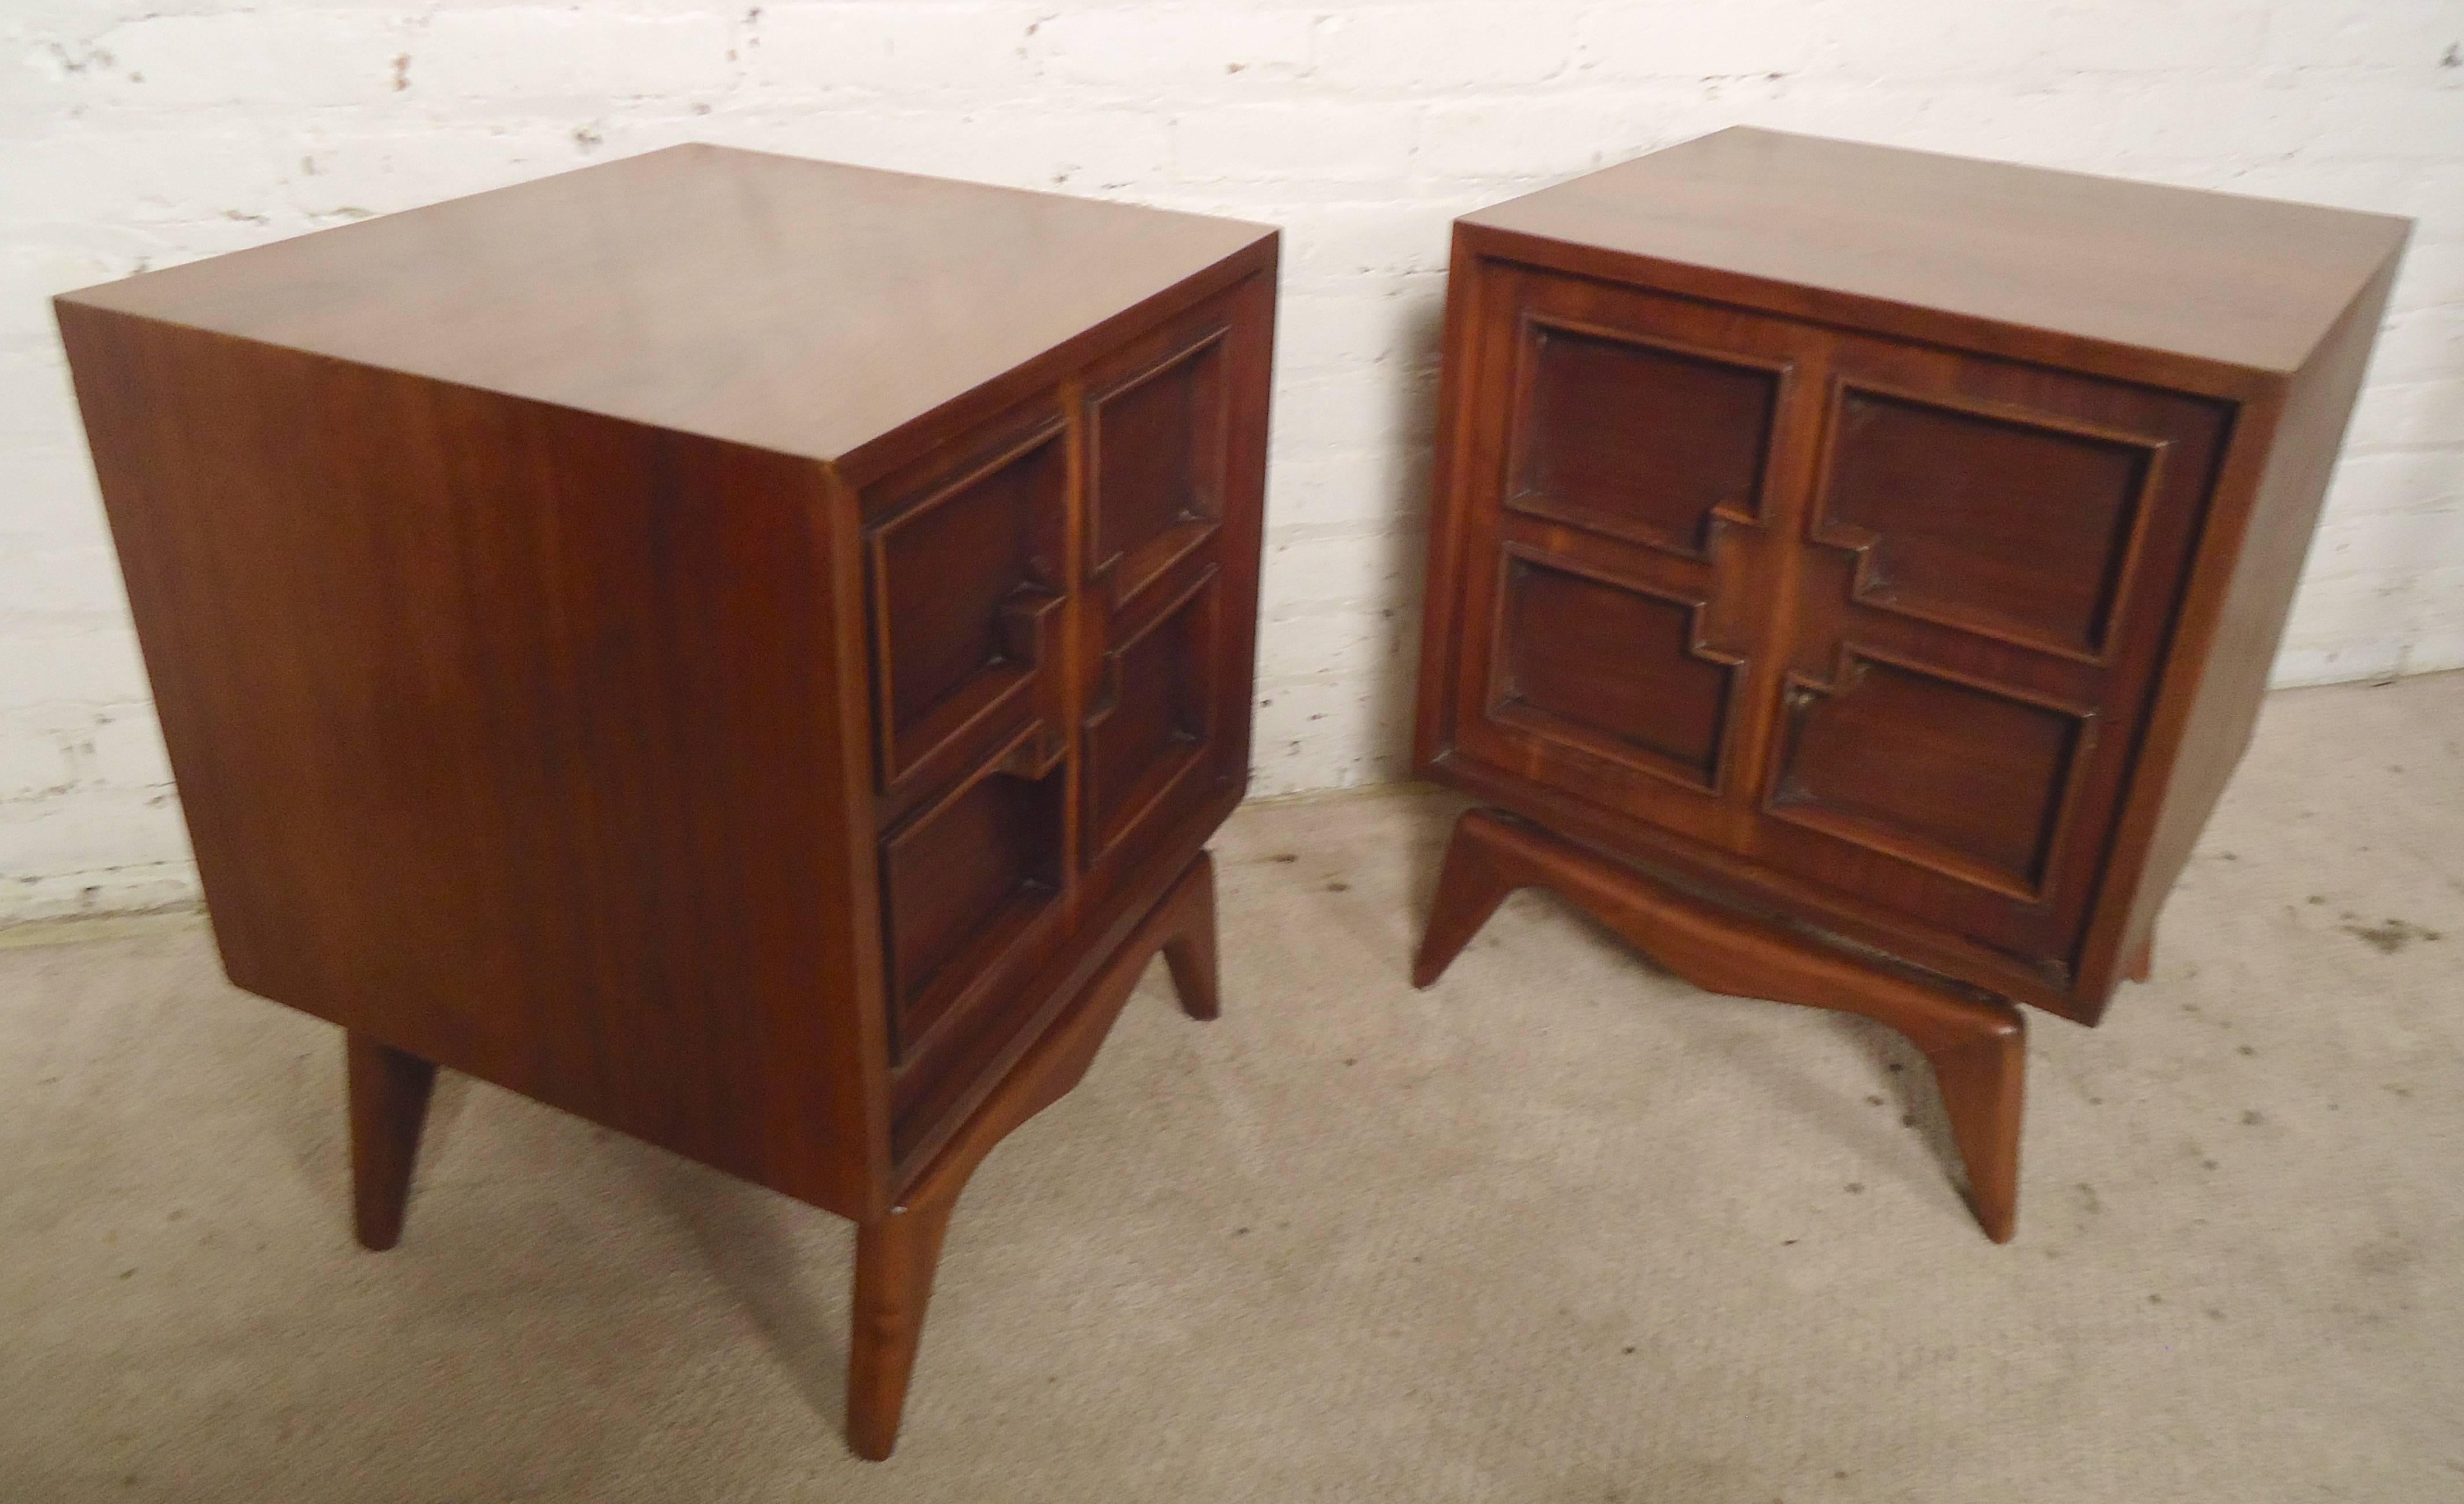 Unusual nightstands in walnut grain with cross style pattern doors. Sculpted legs, removable shelf, deep cabinets space.

(Please confirm item location - NY or NJ - with dealer).
 